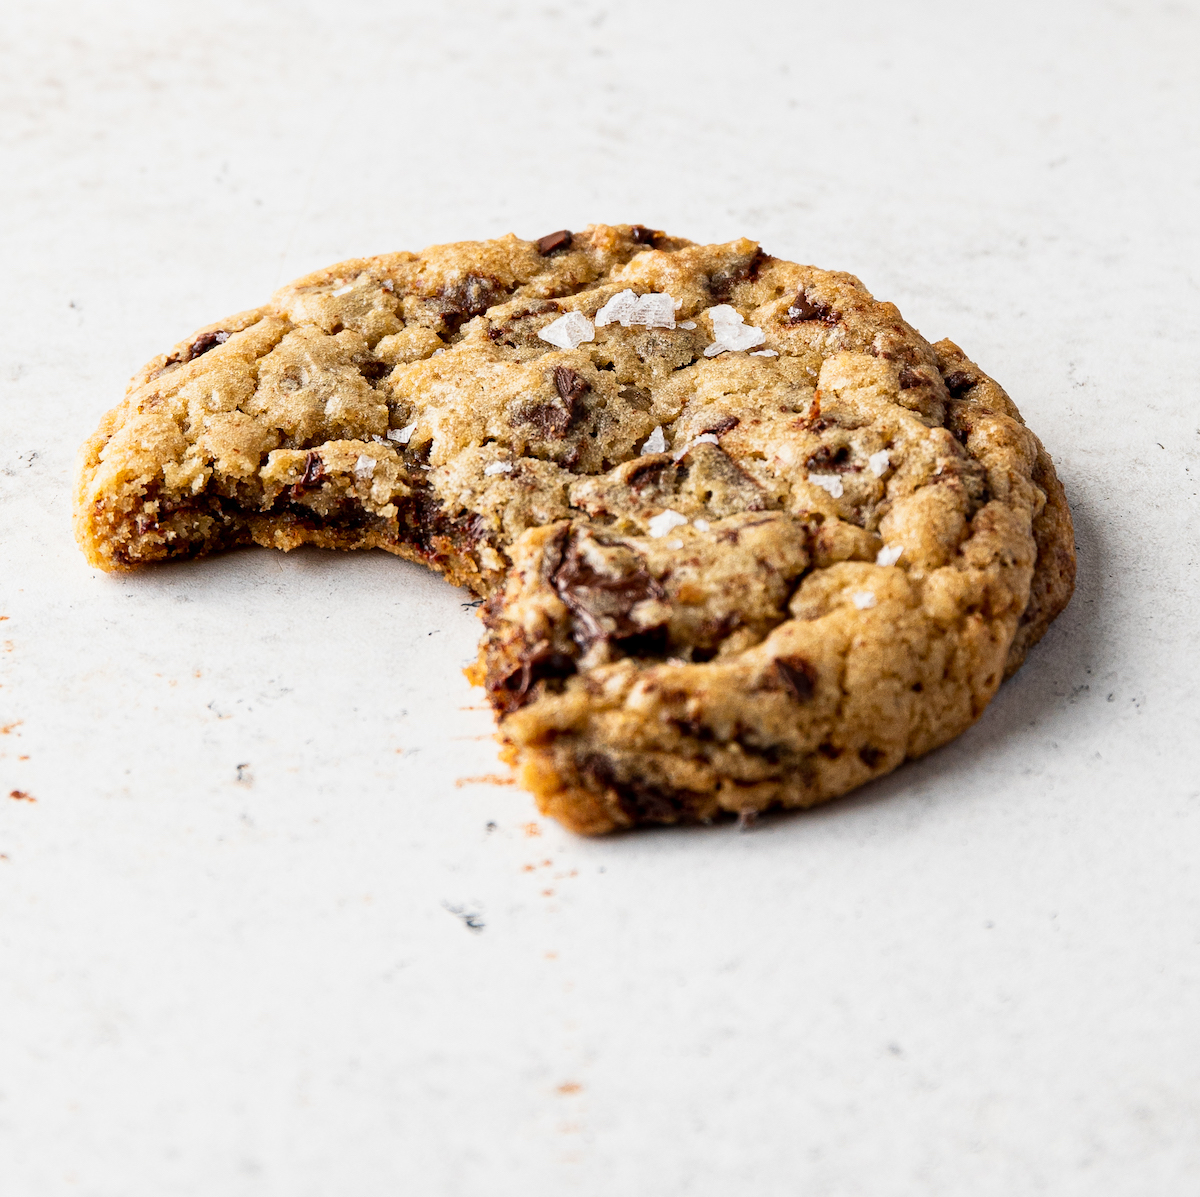 A close up shot of a chocolate chip cookie with a bite out of it.